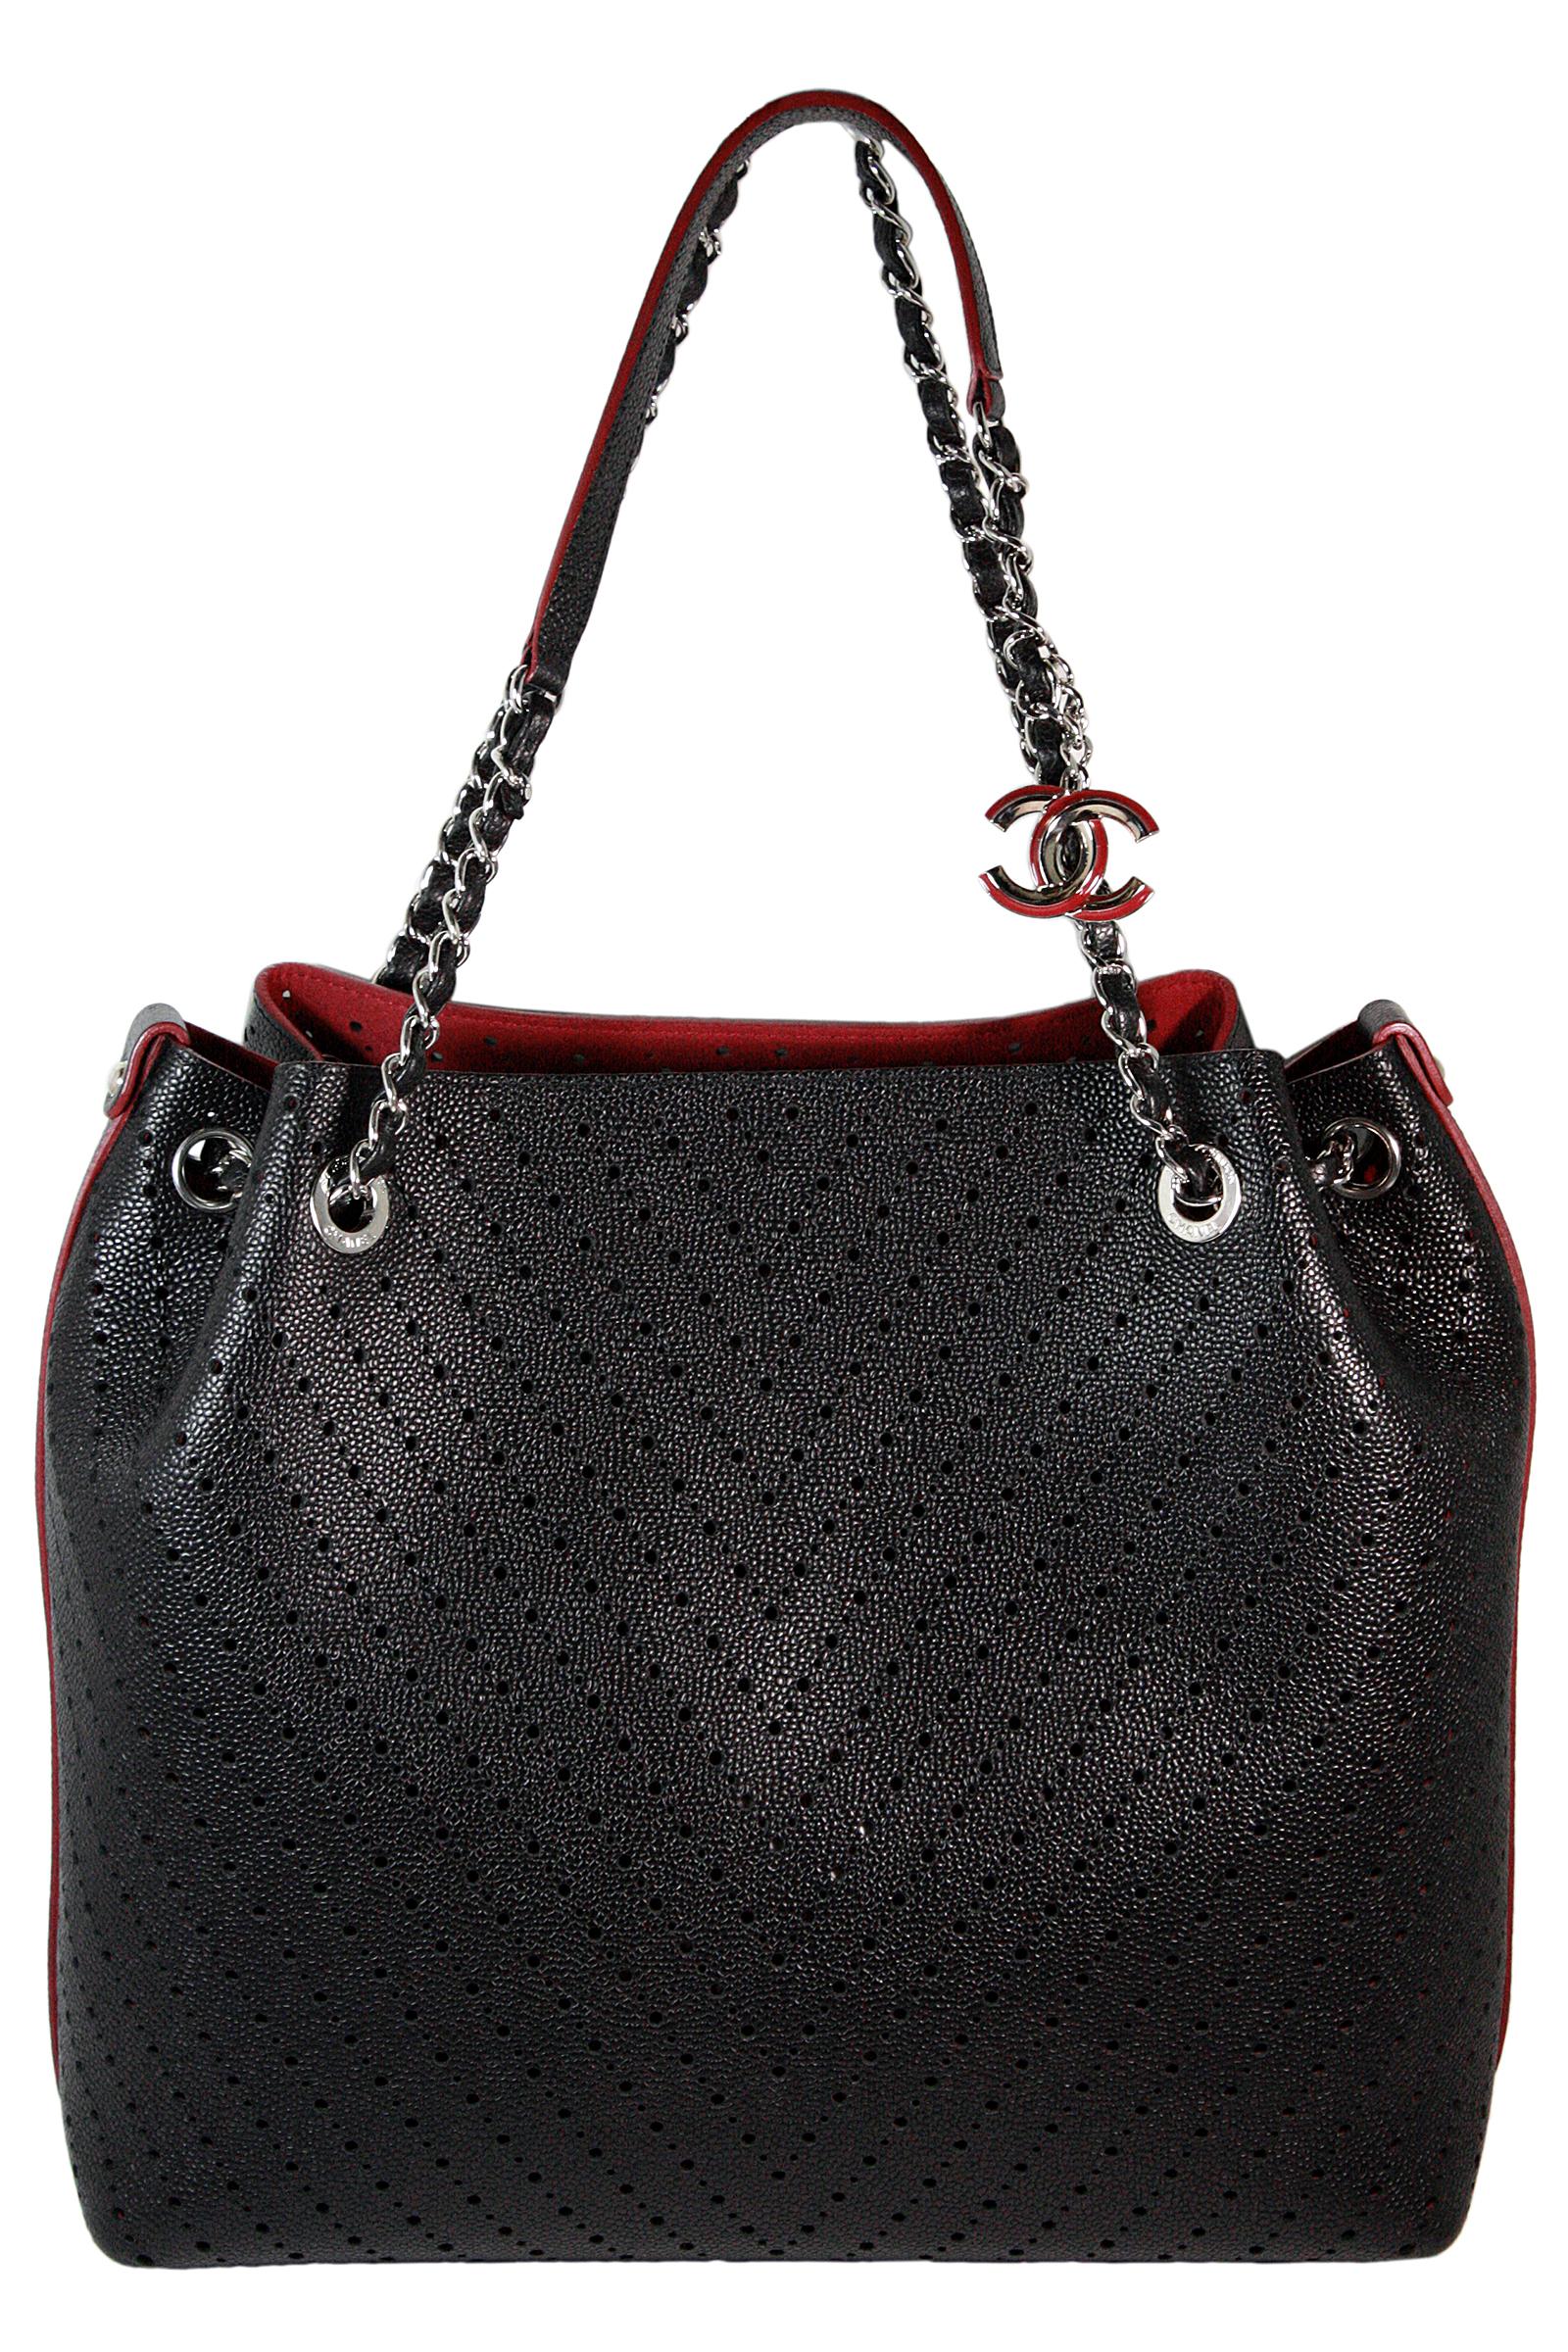 Large tote bag
Black textured leather with burgundy suede interior 
Attached enameled silver logo chain 
Iconic chain leather handle 
Small circular cutout leather design 
Maroon textured leather envelope clutch included 
Orignal box included
Made